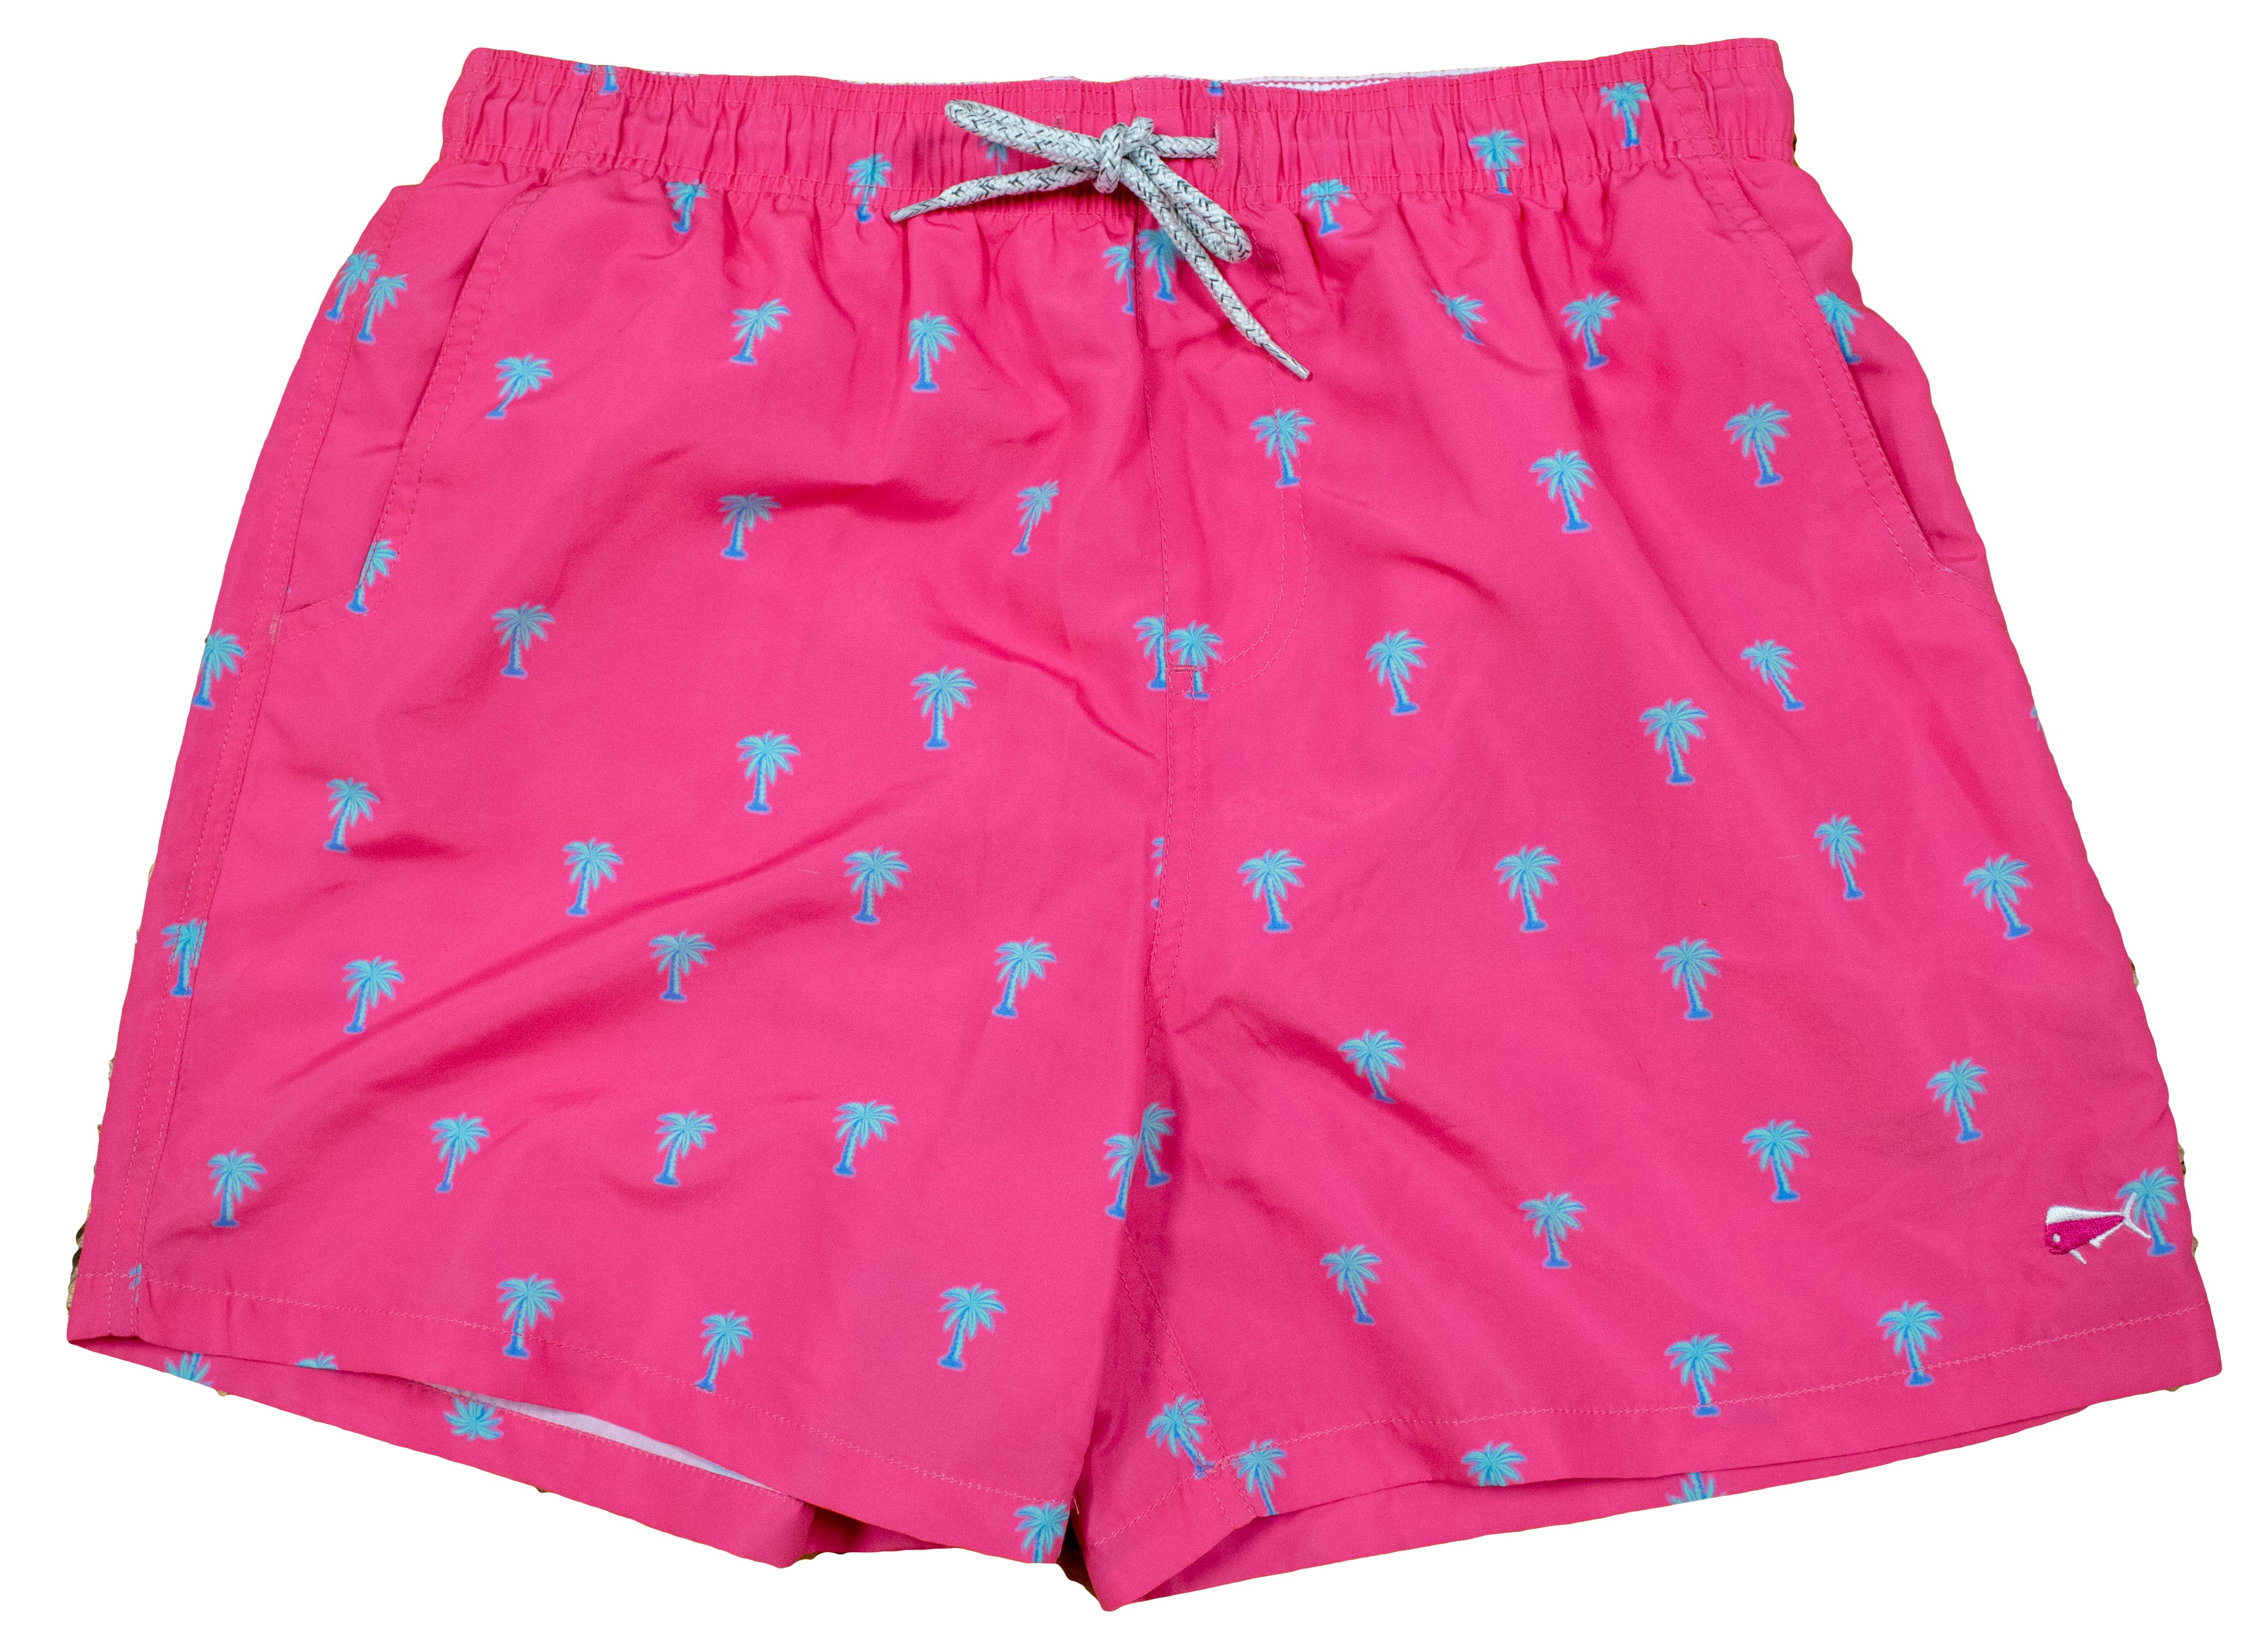 Men's Printed Swim Trunks - Palm Trees - Pink | SOUTHERN LURE - Southern  Lure